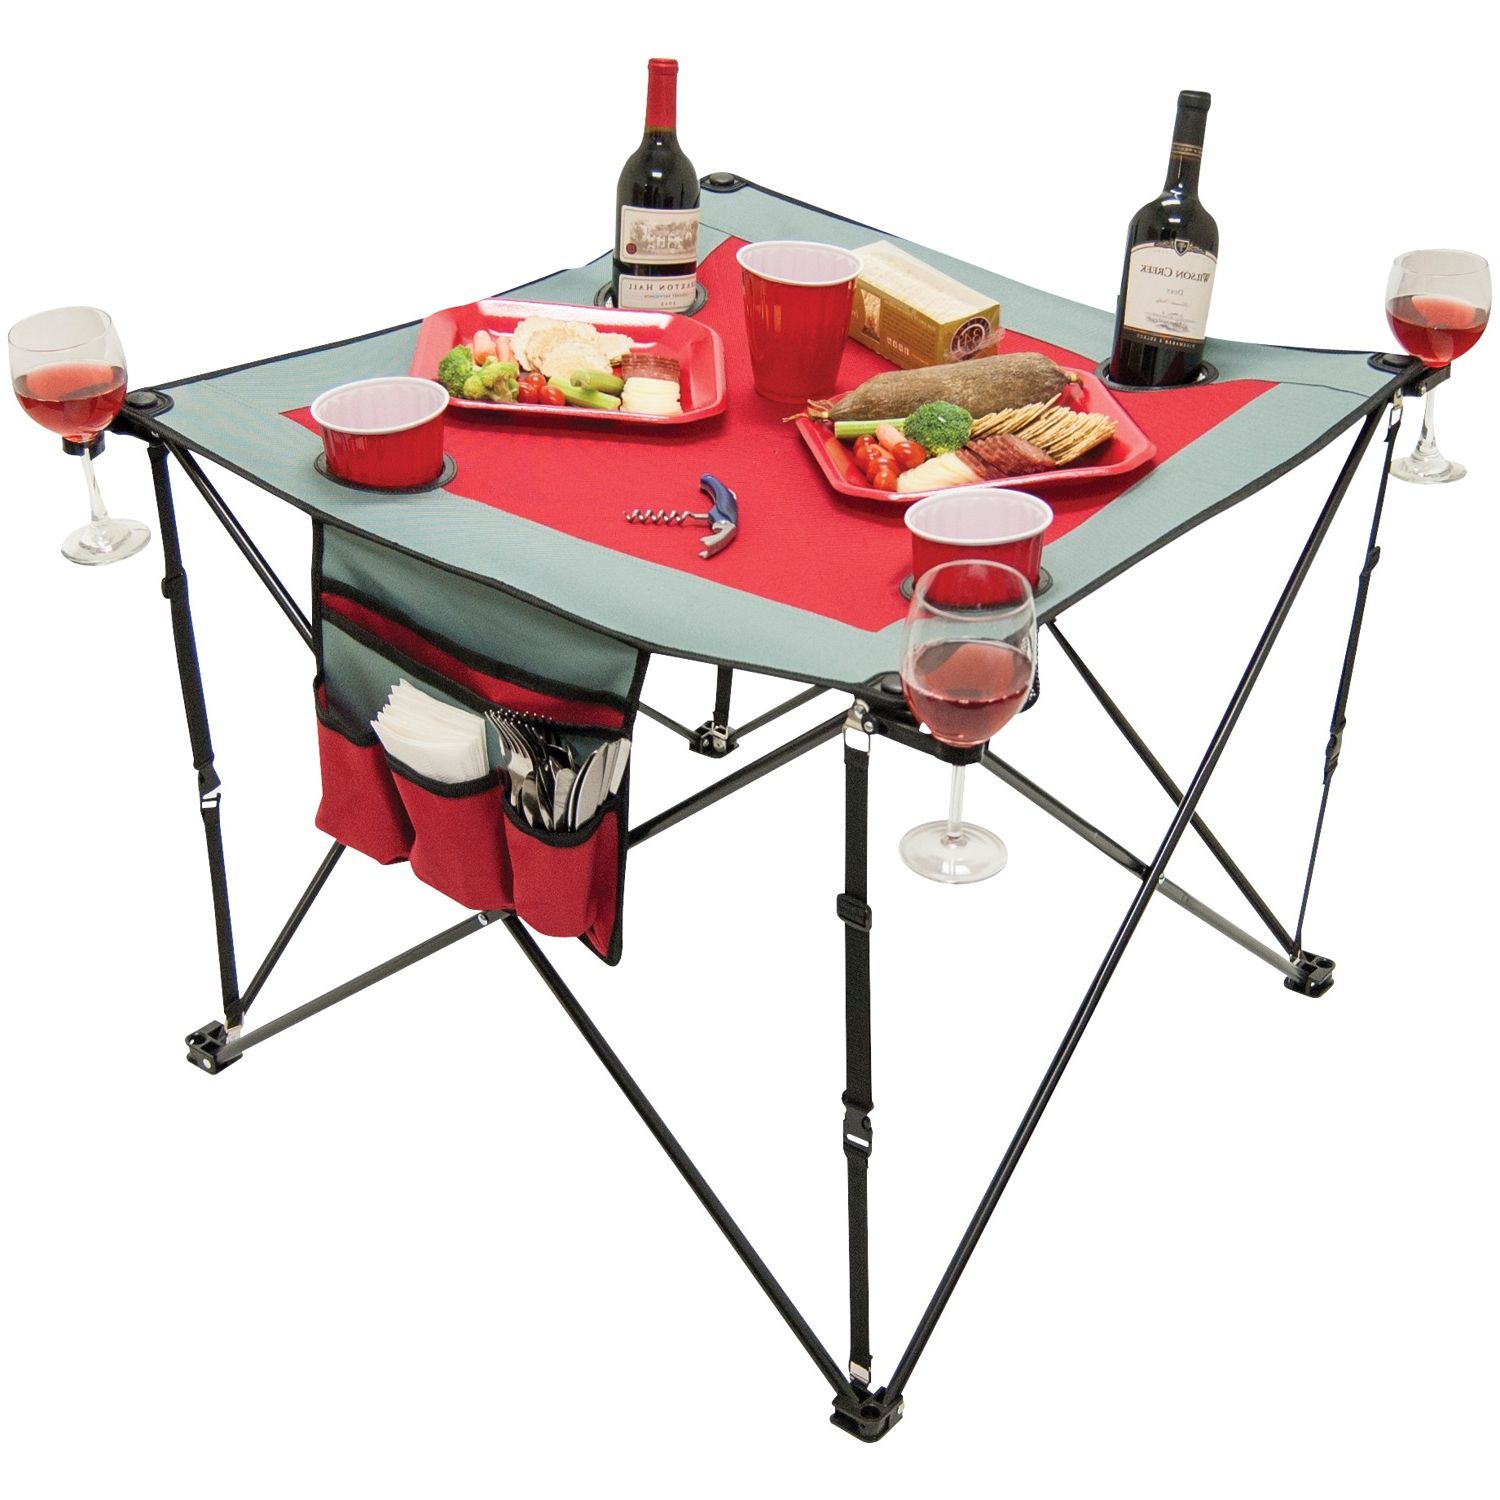 Outdoor Chair With Wine Holder Regarding Trendy Creative Outdoor Distributor 820111 Folding Wine Table With Cup Holders (View 15 of 15)